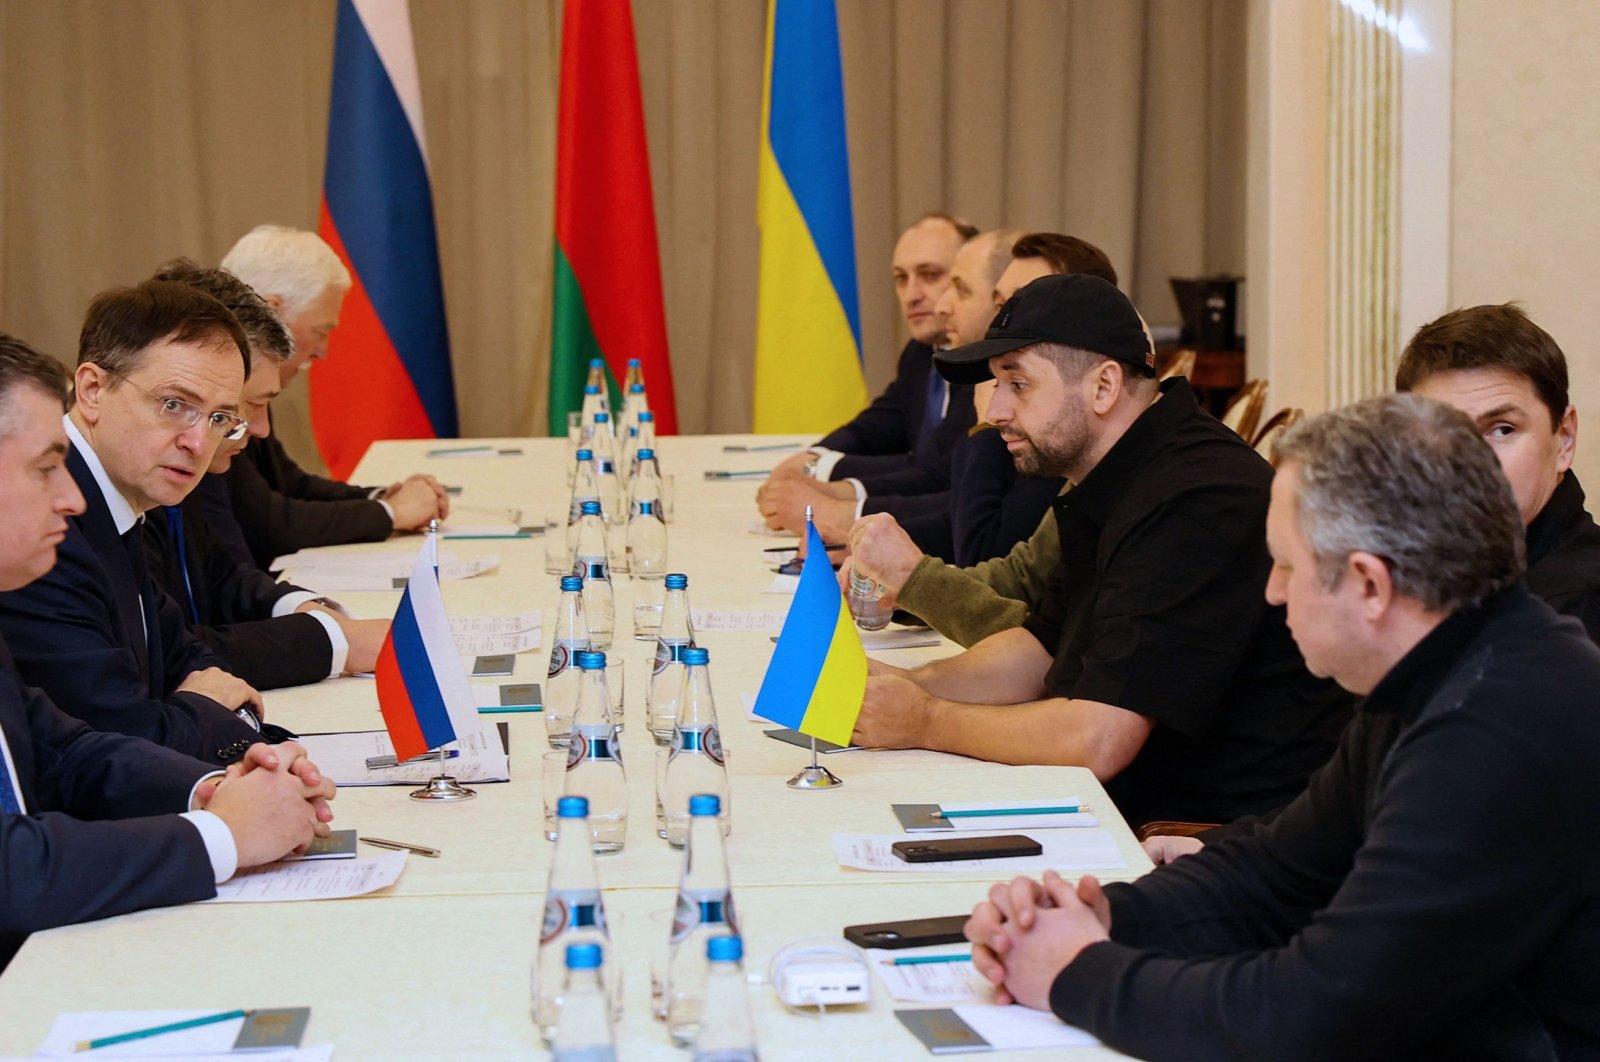 Members of delegations from Ukraine and Russia, including Russian presidential aide Vladimir Medinsky (2L), Ukrainian presidential aide Mykhailo Podolyak (2R), Volodymyr Zelenskyy&#039;s "Servant of the People" lawmaker Davyd Arakhamia (3R), hold talks following the Russian invasion of Ukraine, in Belarus&#039; Gomel region, Feb. 28, 2022. (Photo by Sergei KHOLODILIN / BELTA / AFP) / Belarus OUT